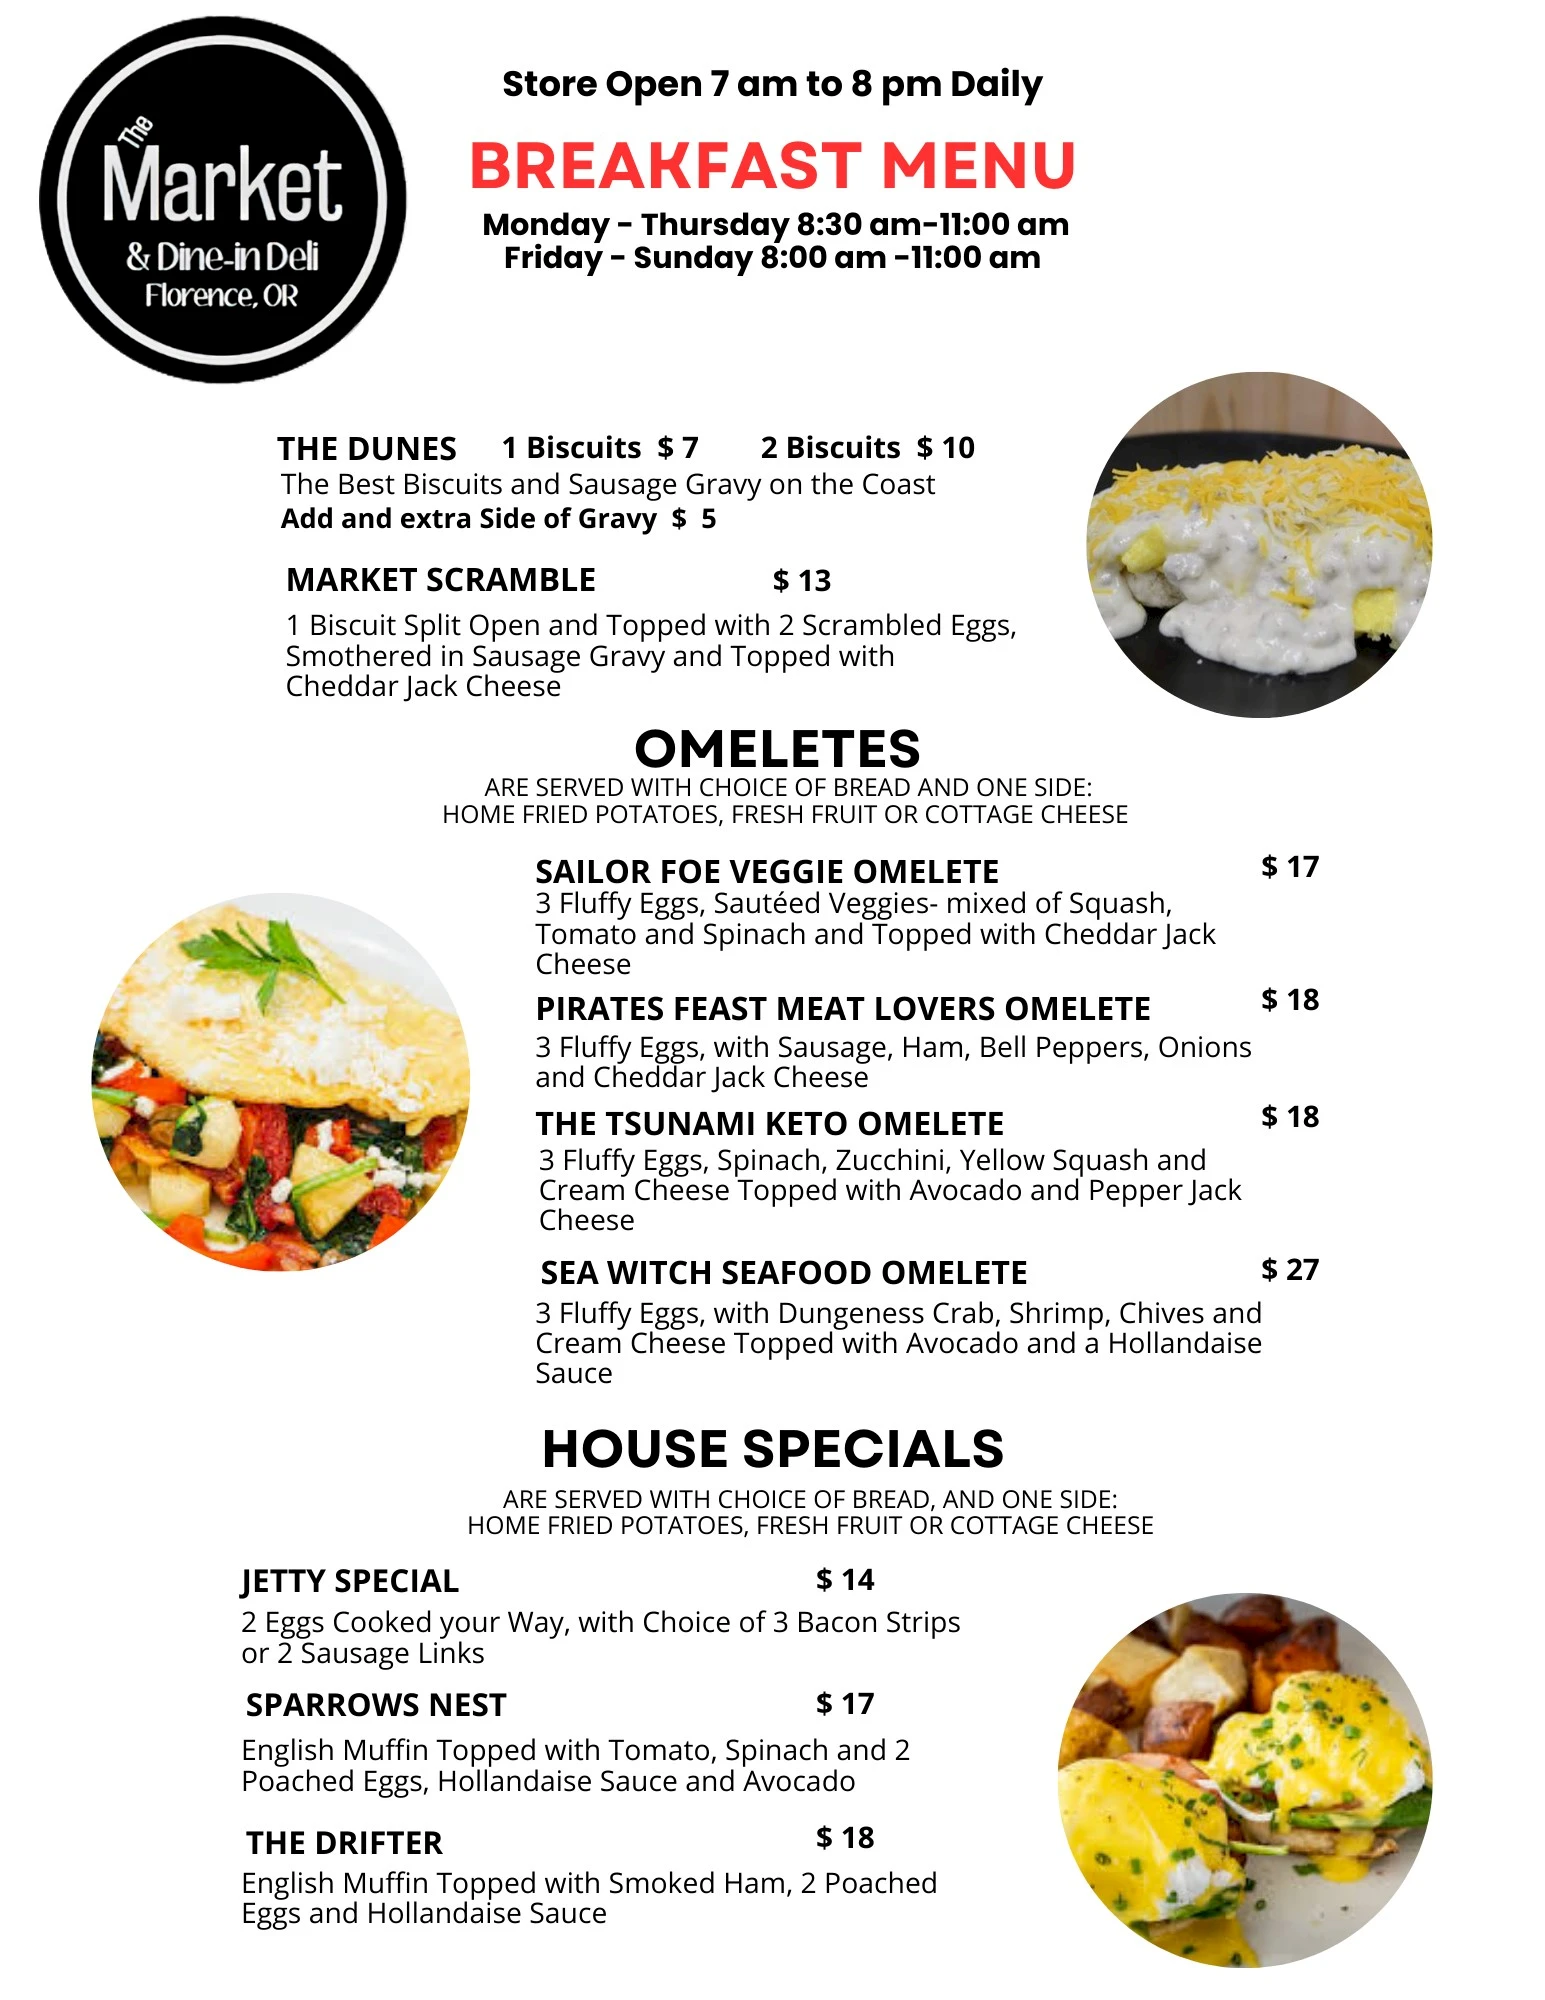 This a breakfast menu featuring different types of omelets and house specials.